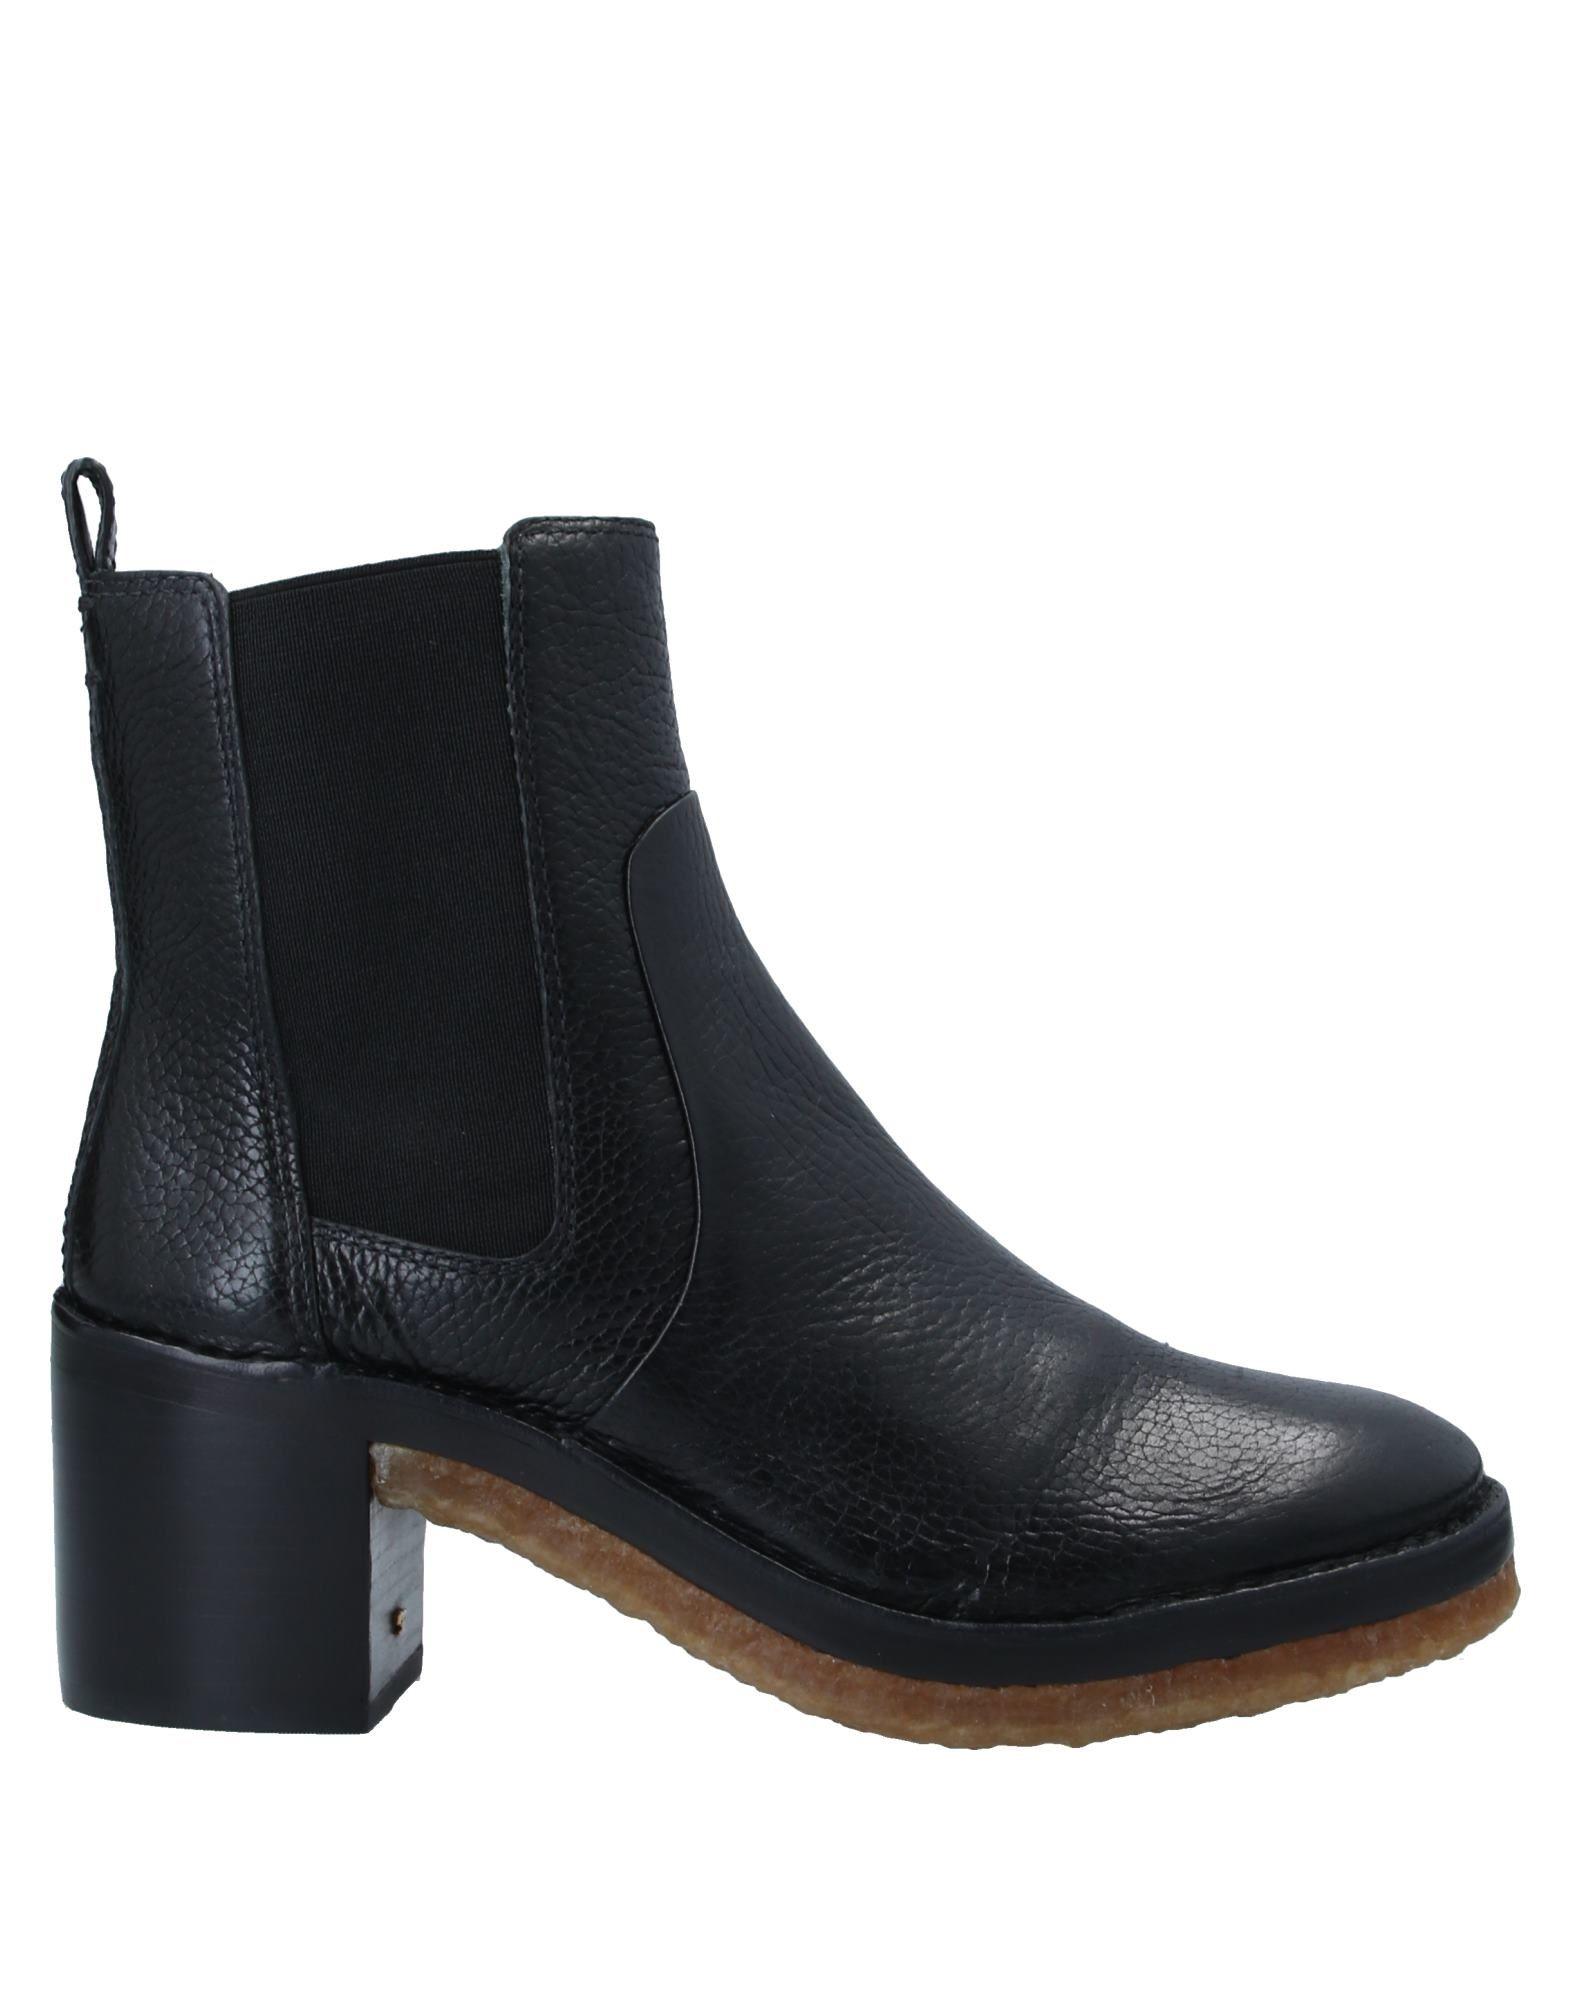 Tory Burch Leather Ankle Boots in Black - Lyst